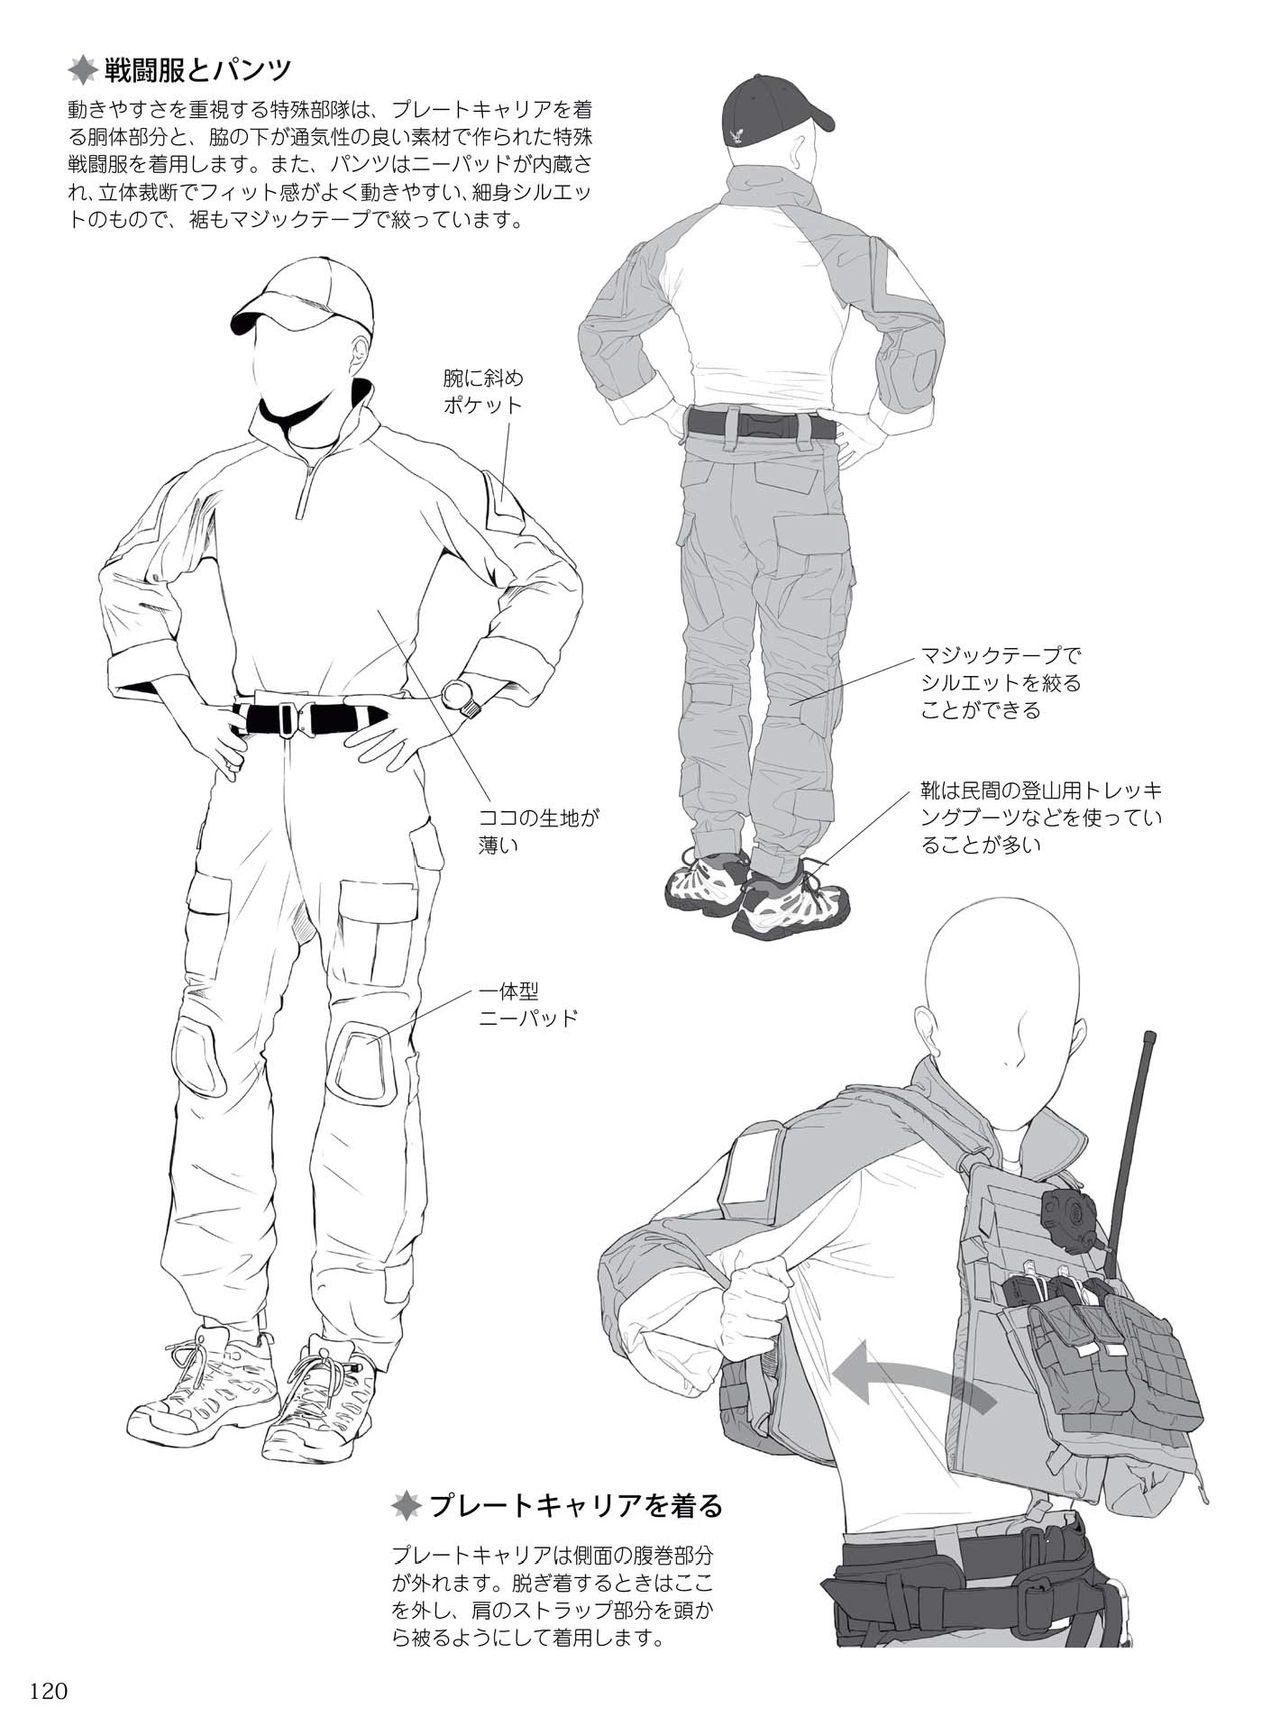 How to draw military uniforms and uniforms From Self-Defense Forces 軍服・制服の描き方 アメリカ軍・自衛隊の制服から戦闘服まで 123